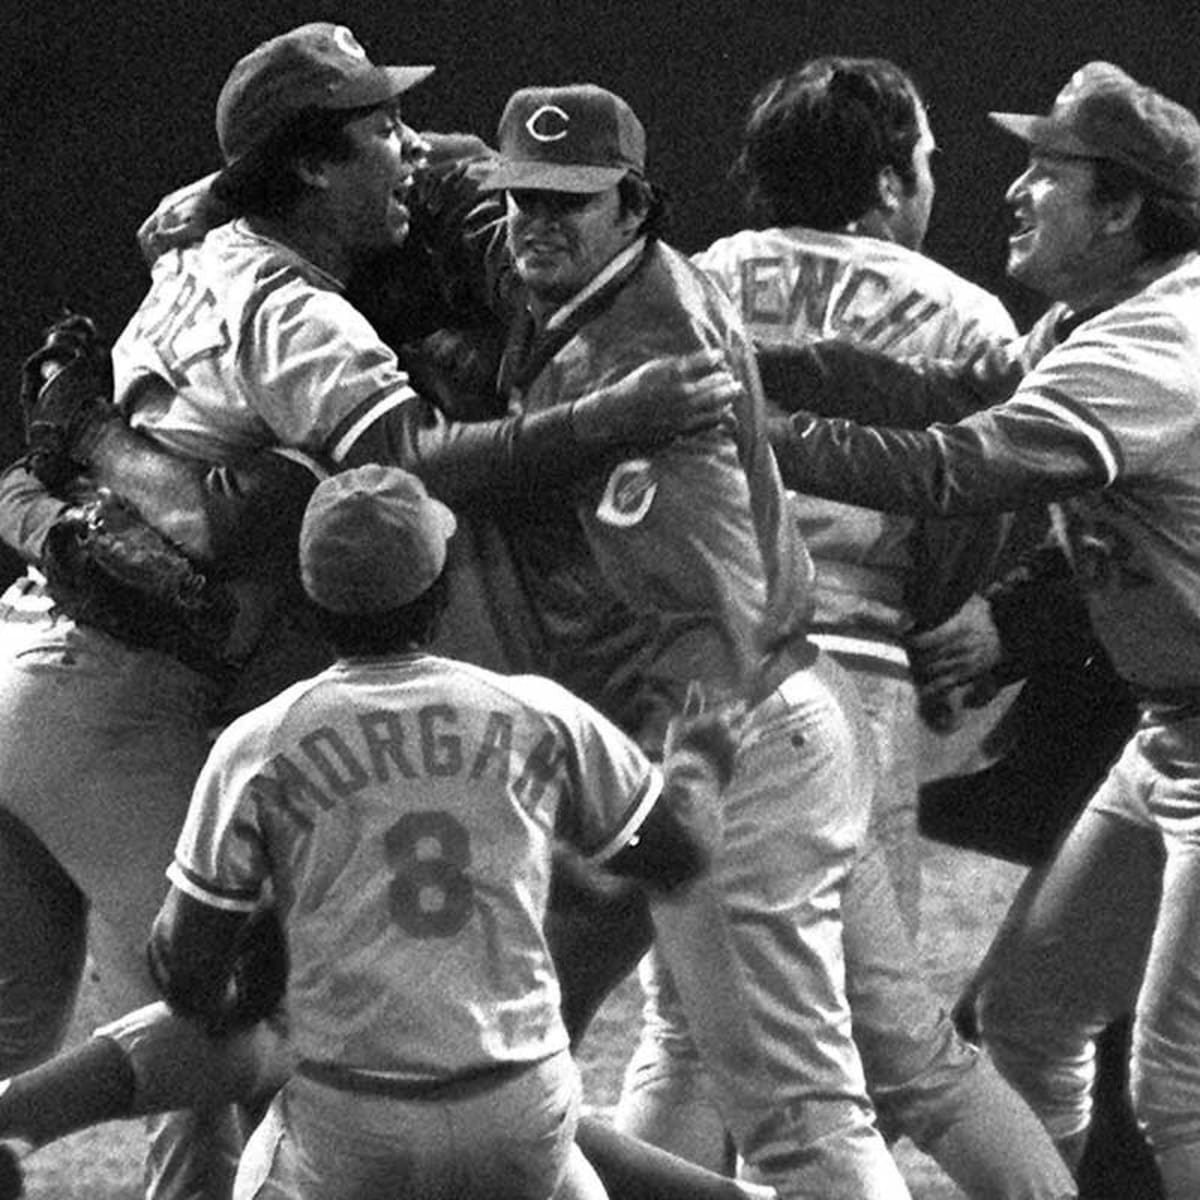 1975 World Series Reds beat Red Sox in seven games